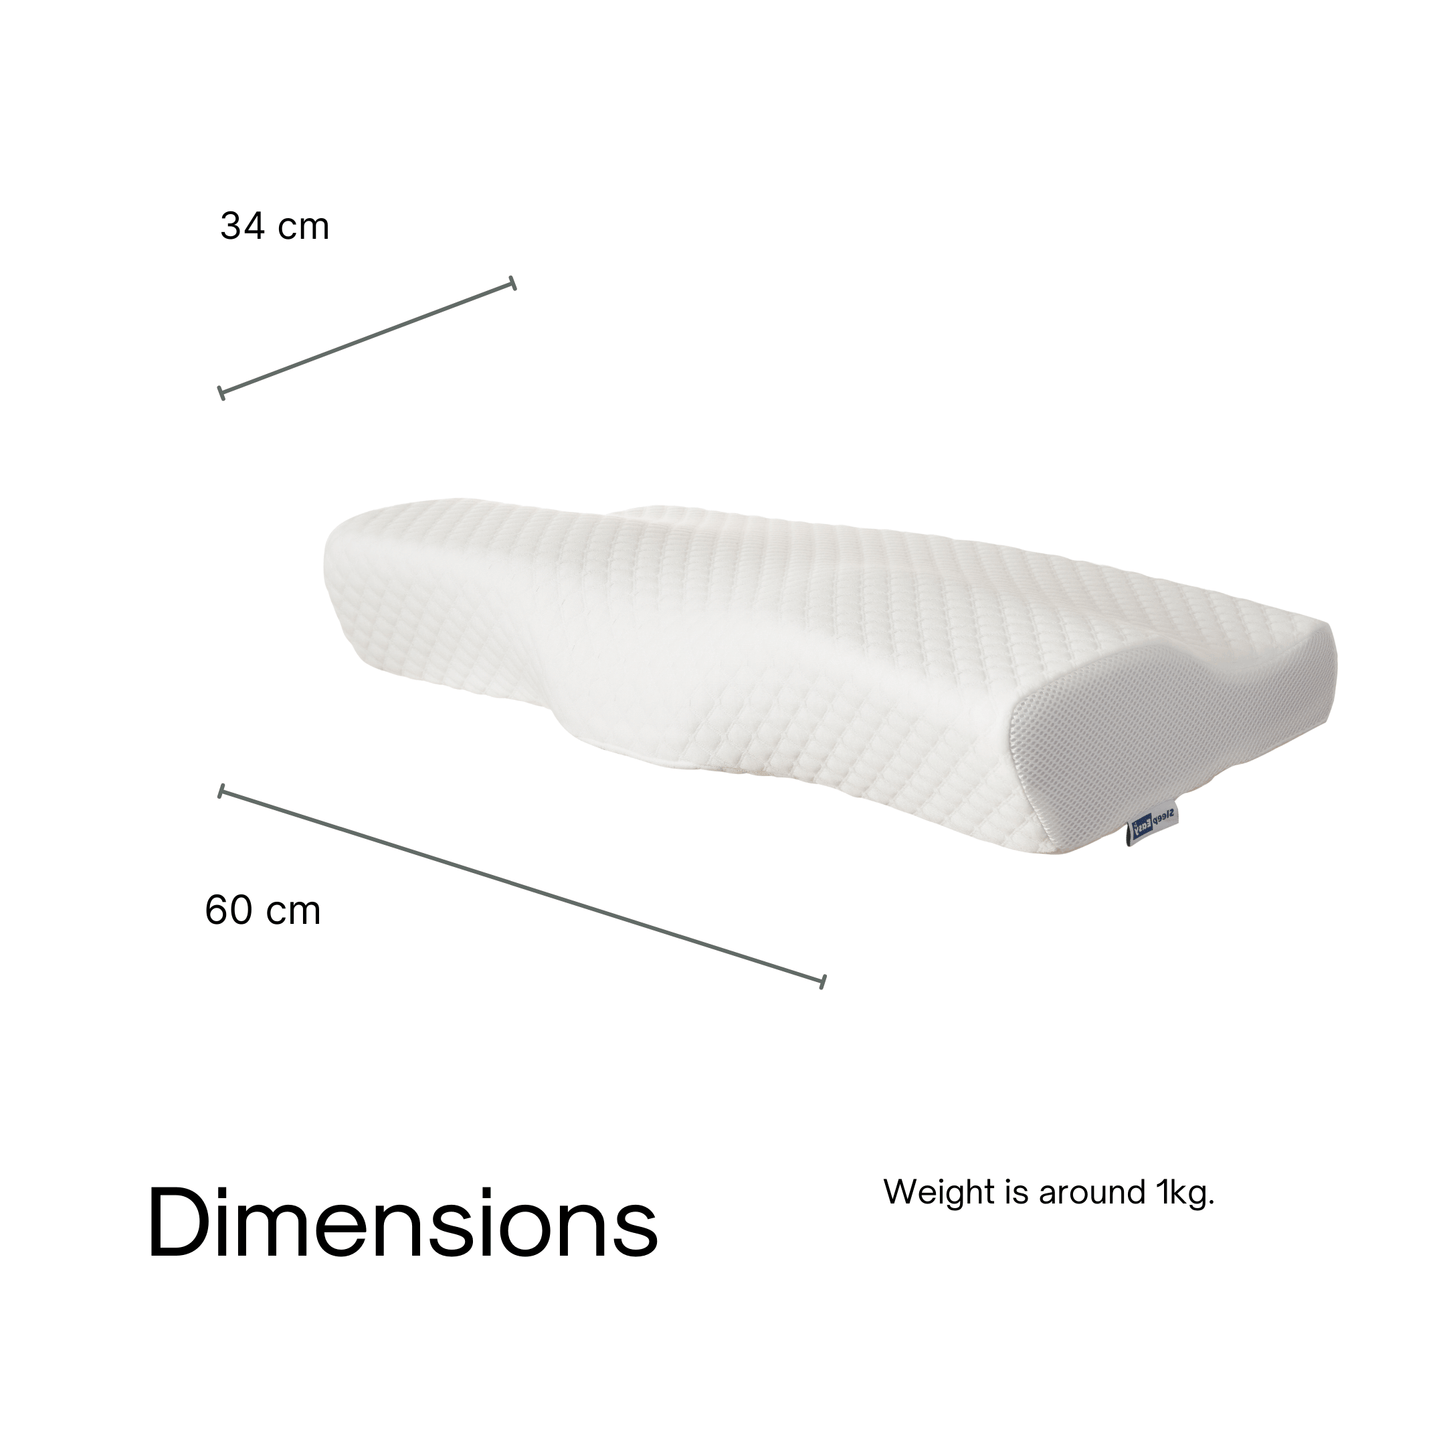 The Original Groove® Pillow For Neck Pain